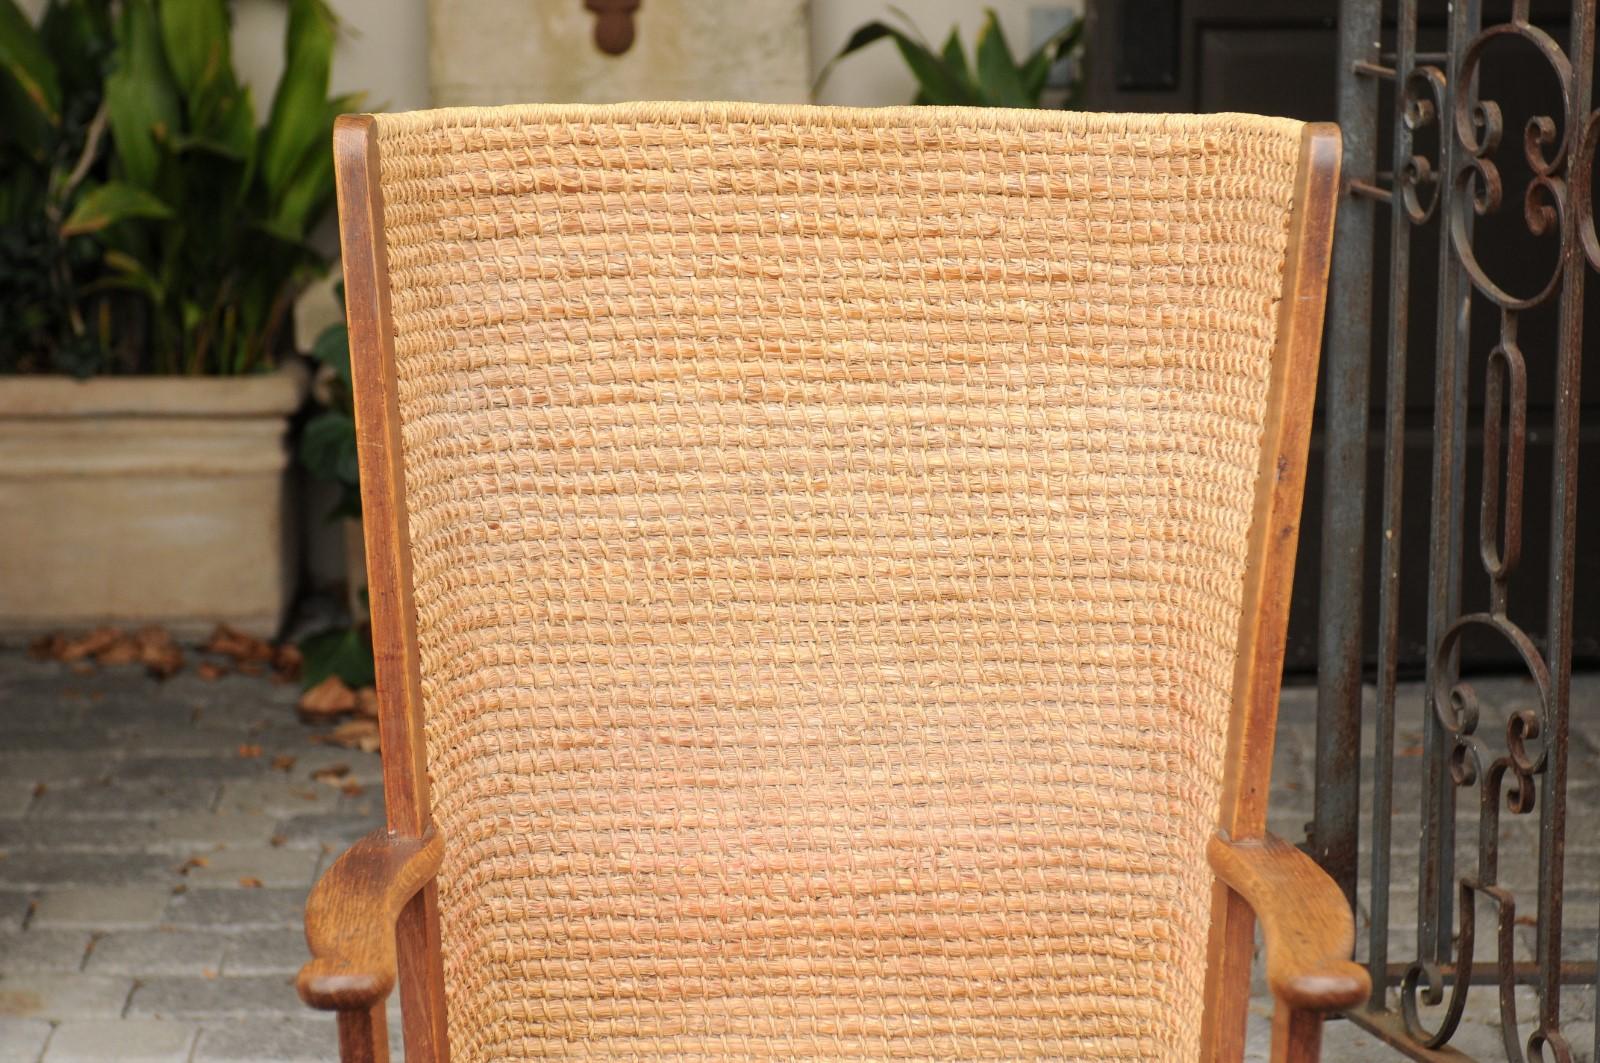 Scottish Late 19th Century Oak Orkney Island Wingback Chair with Handwoven Straw Back